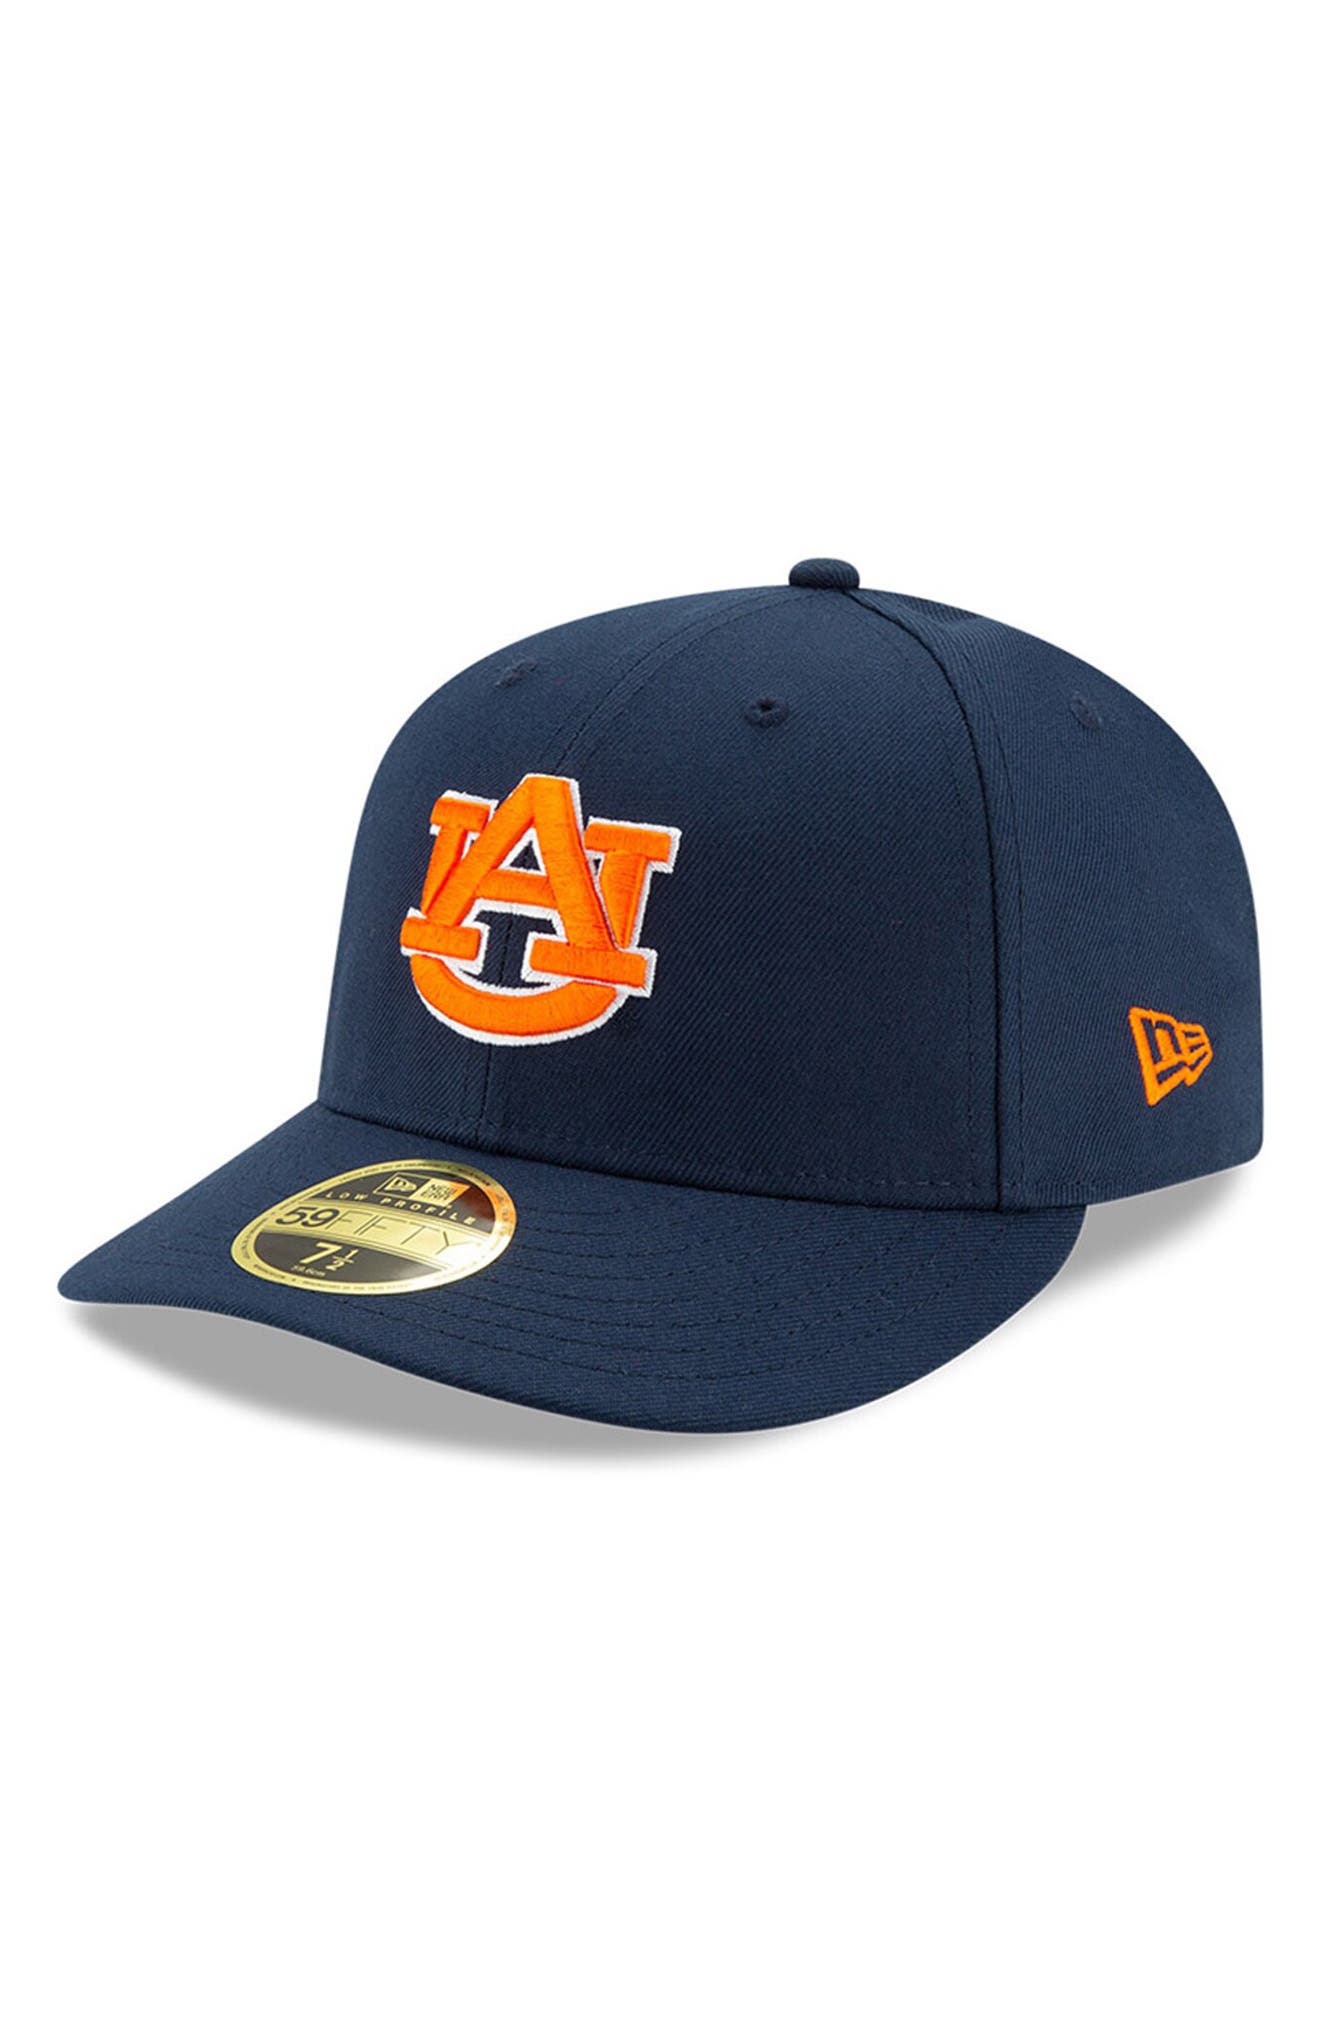 AUBURN TIGERS NCAA LICENCED NEW SPORTS HAT NAVY UNSTRUCTURED 